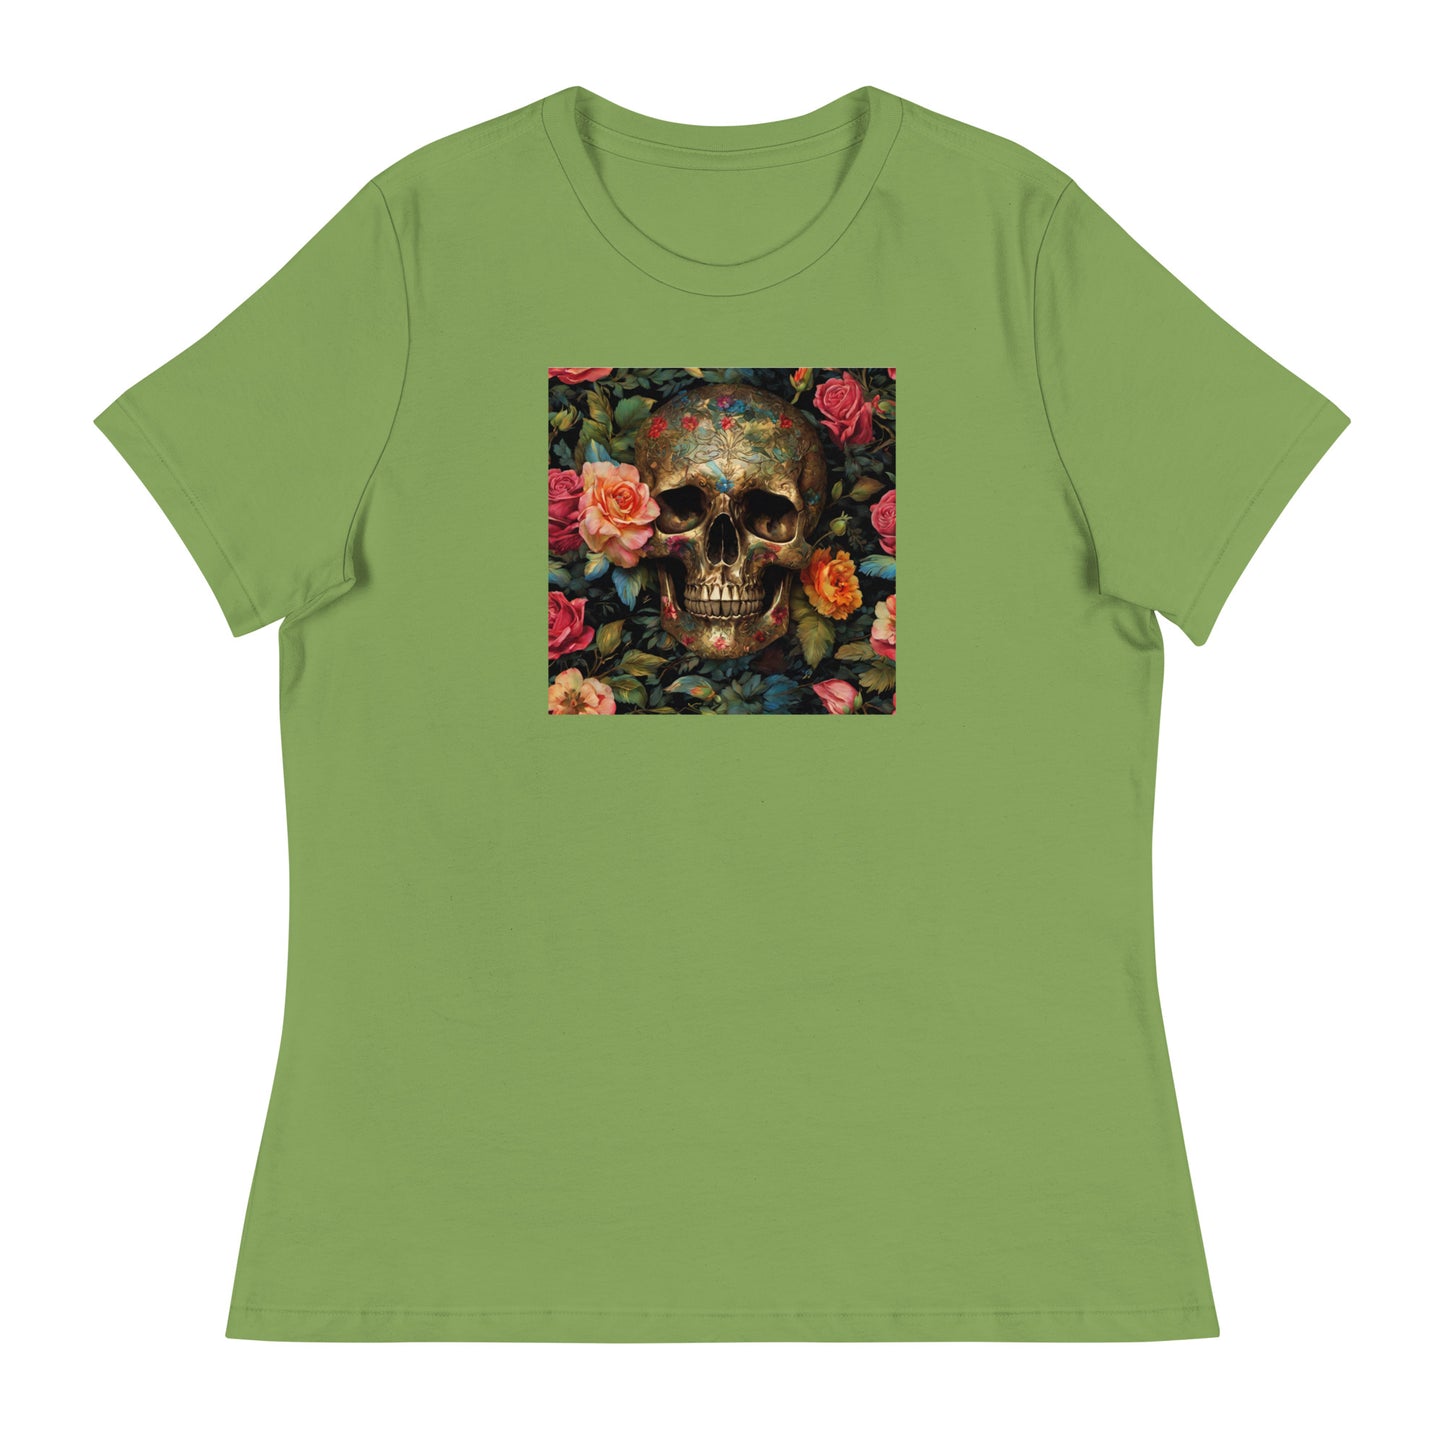 Skull and Roses Graphic Women's T-Shirt Leaf